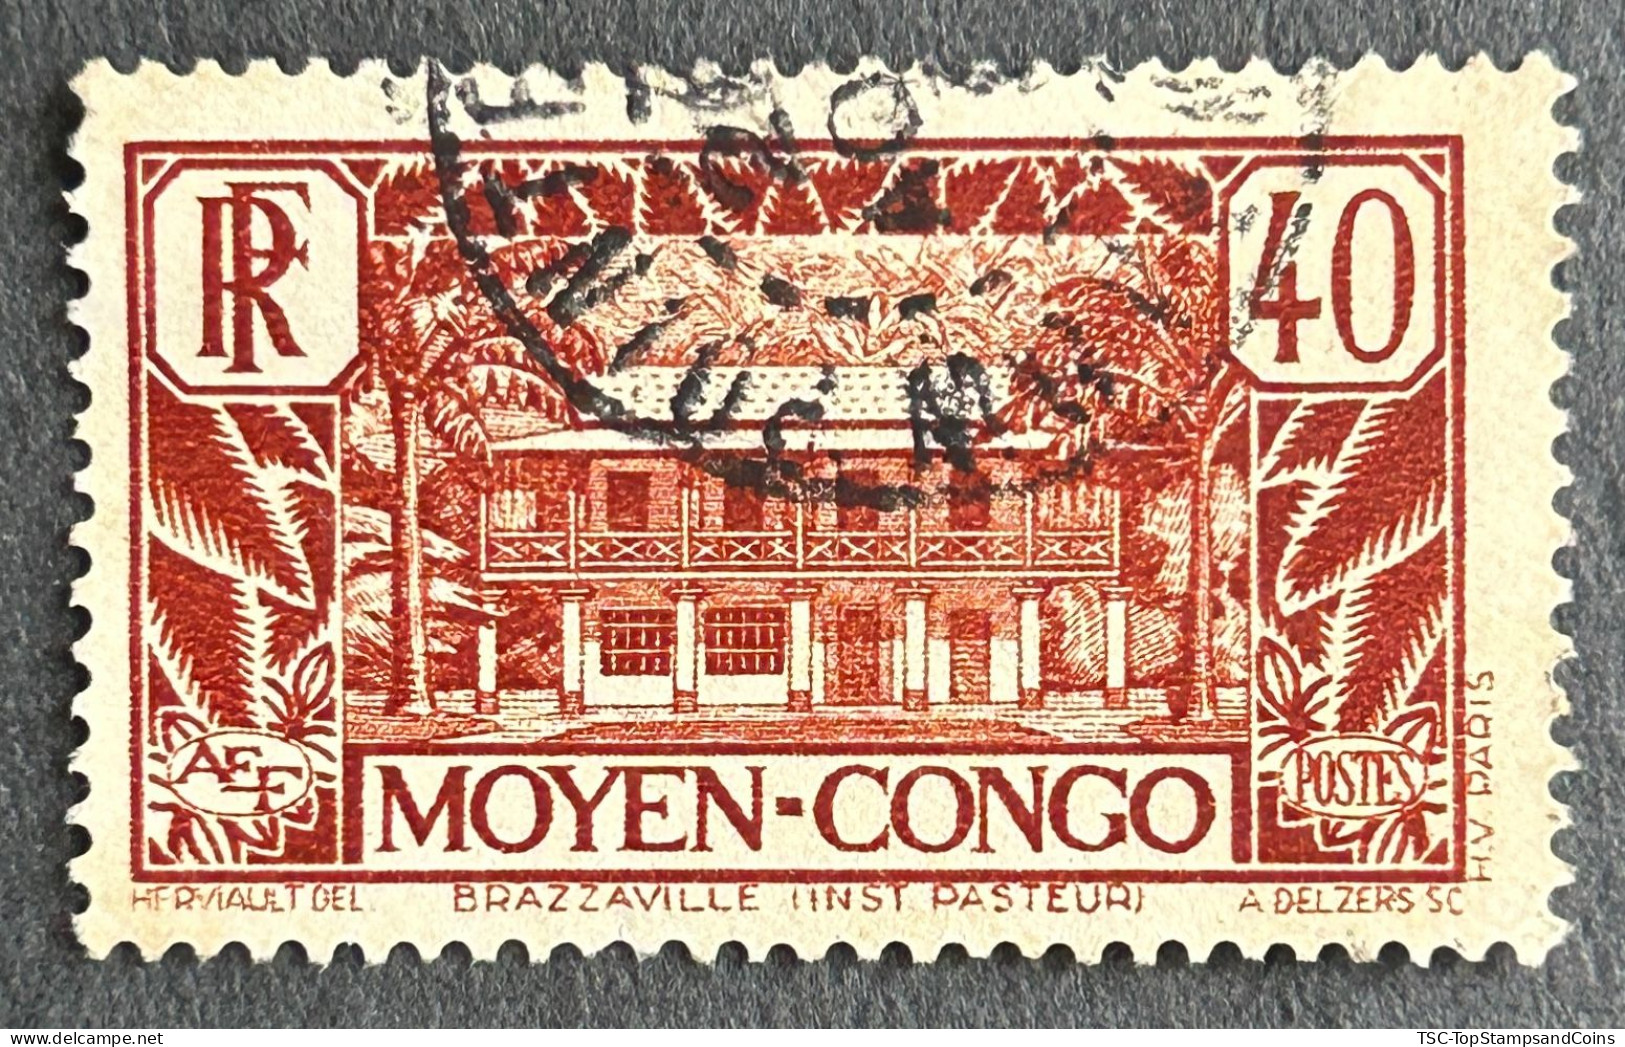 FRCG122U - Brazzaville - Pasteur Institute - 40 C Used Stamp - Middle Congo - 1933 - Used Stamps